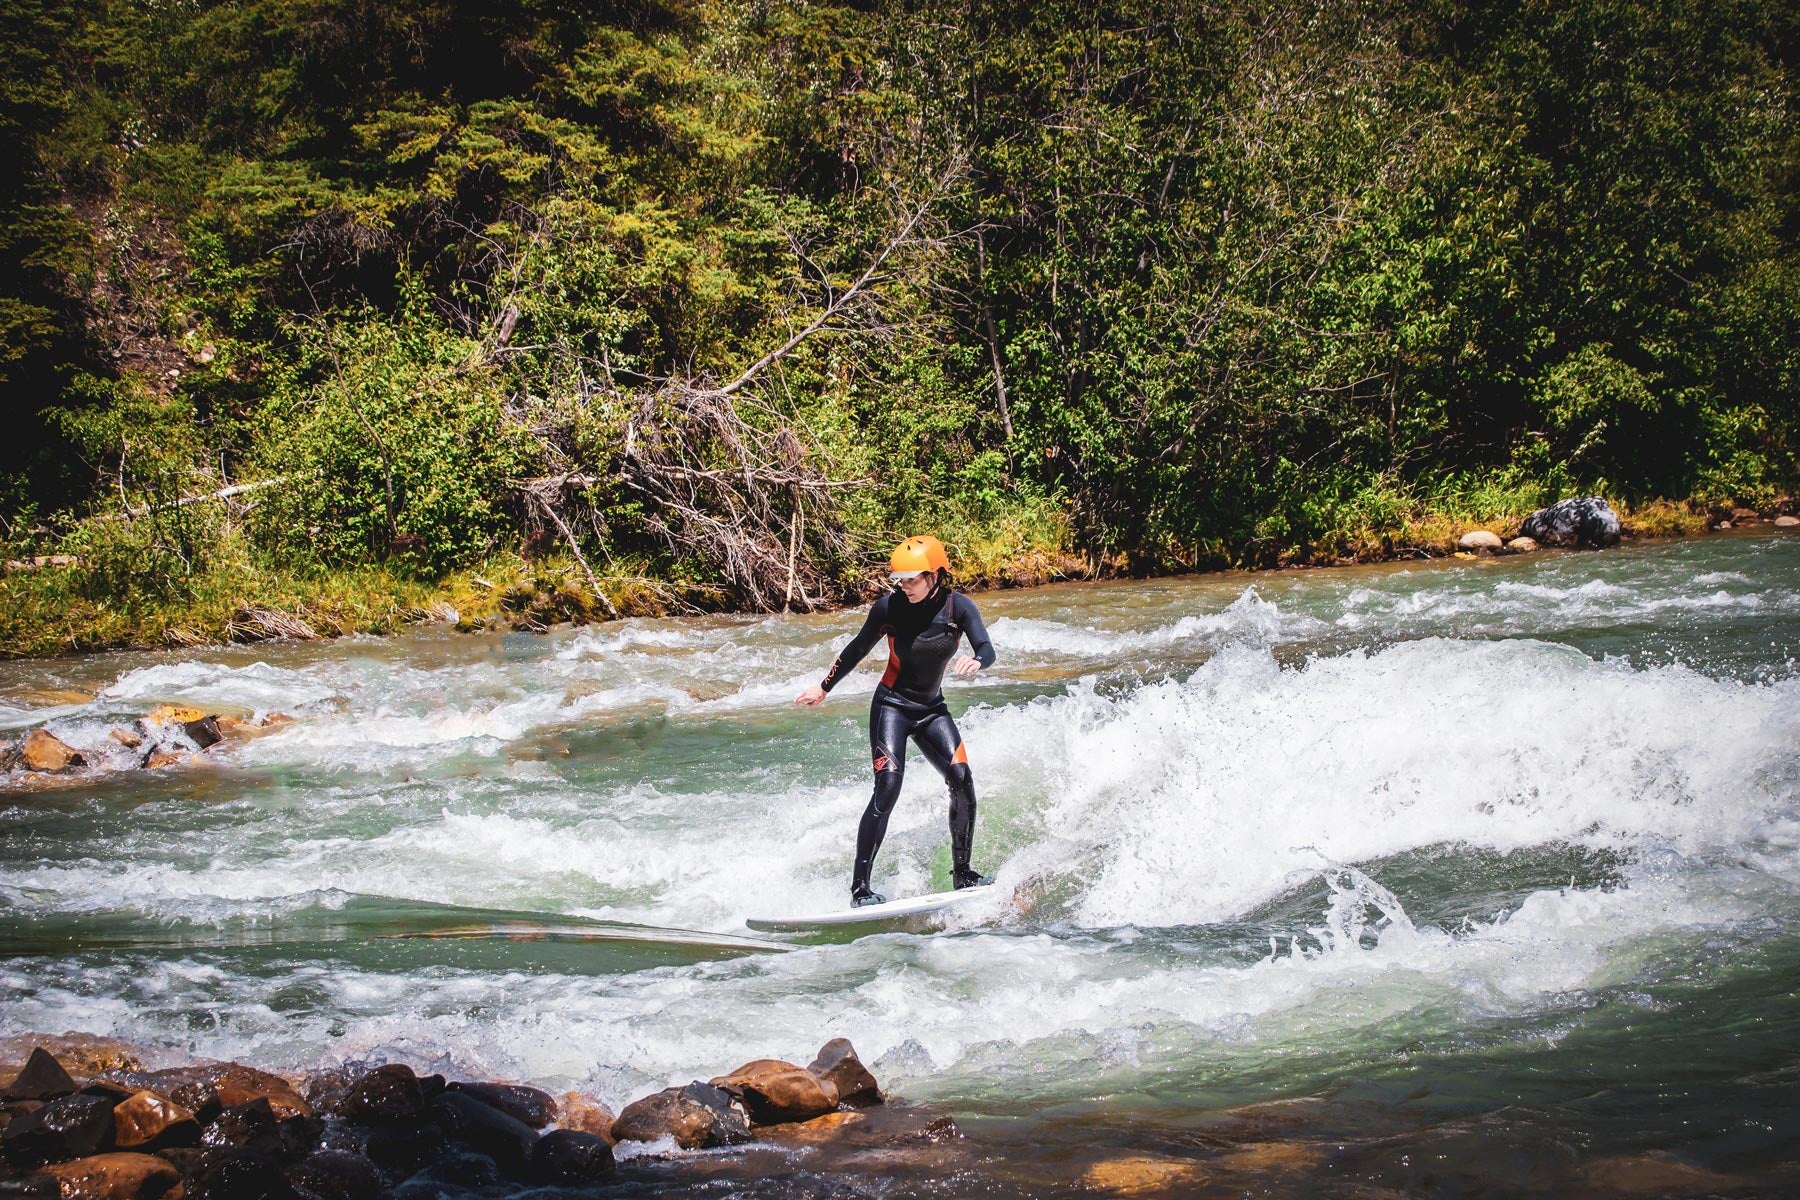 Andrea surfing the mountain wave in Kananaskis country. Photo: Christian Scagliati